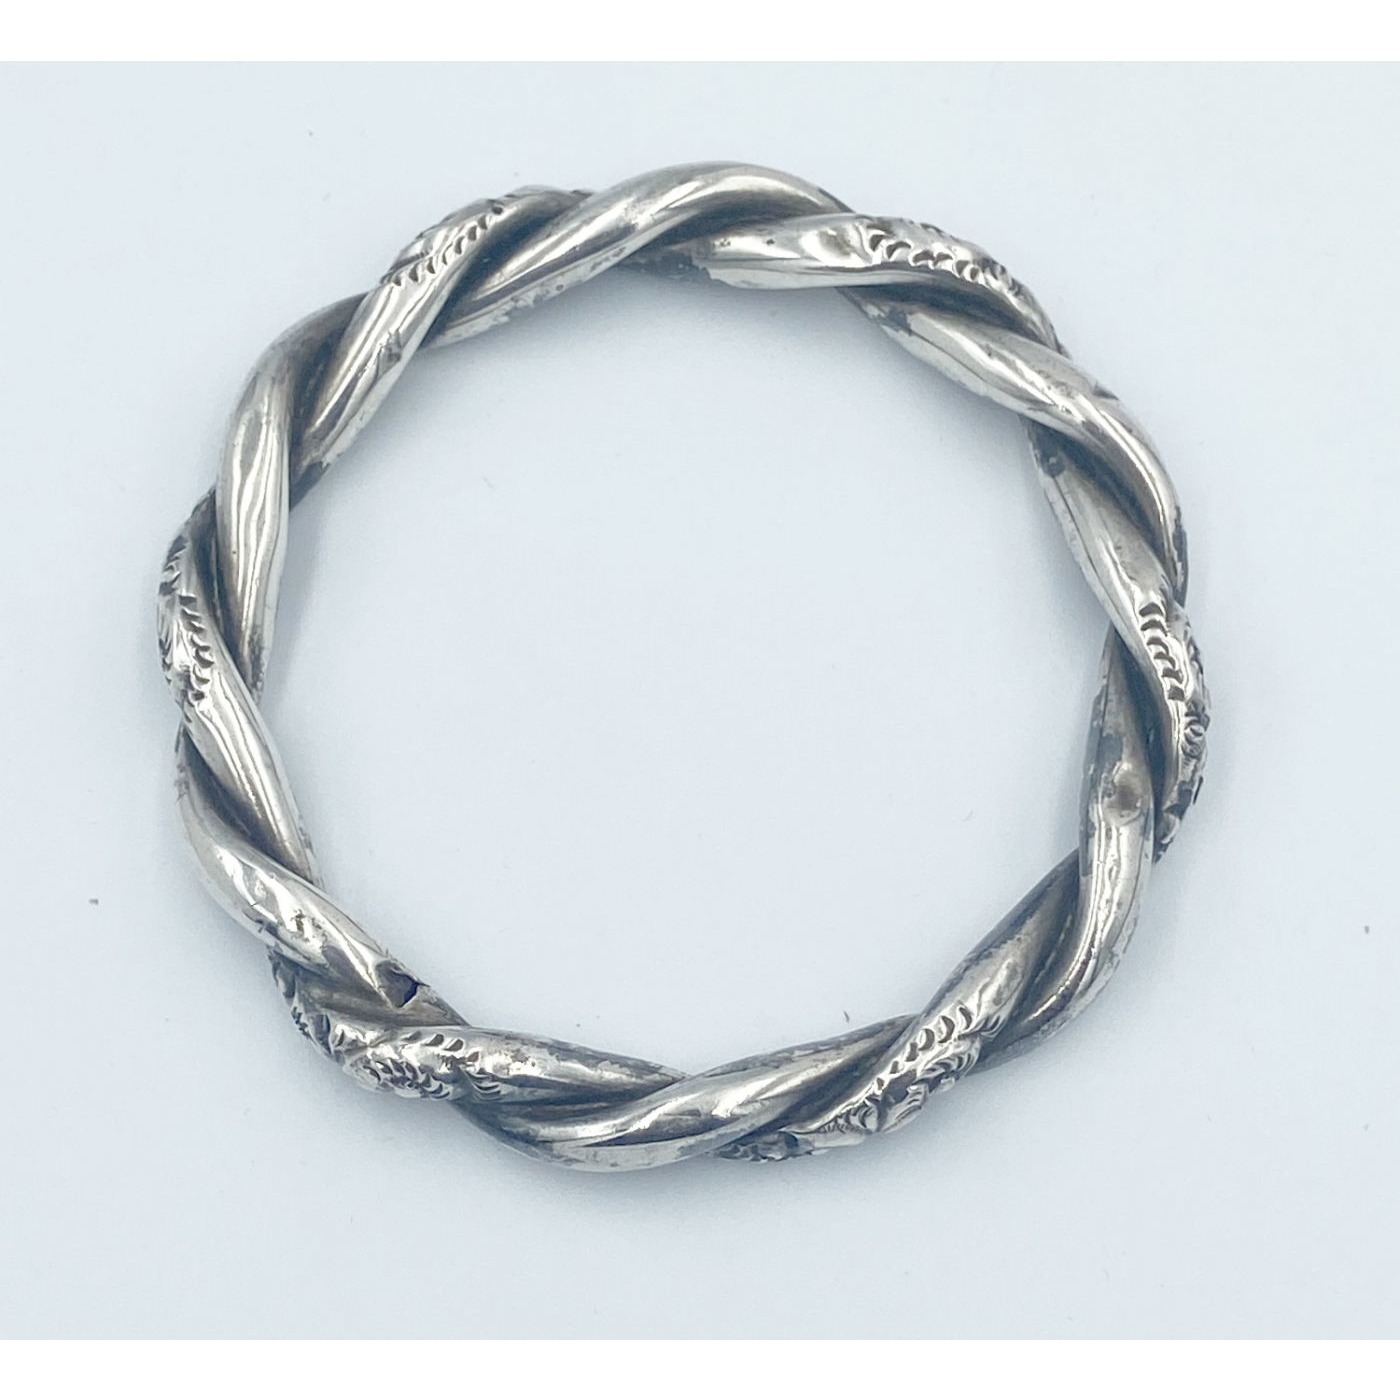 Outstanding Slightly Larger Sterling Silver Twist Bangle